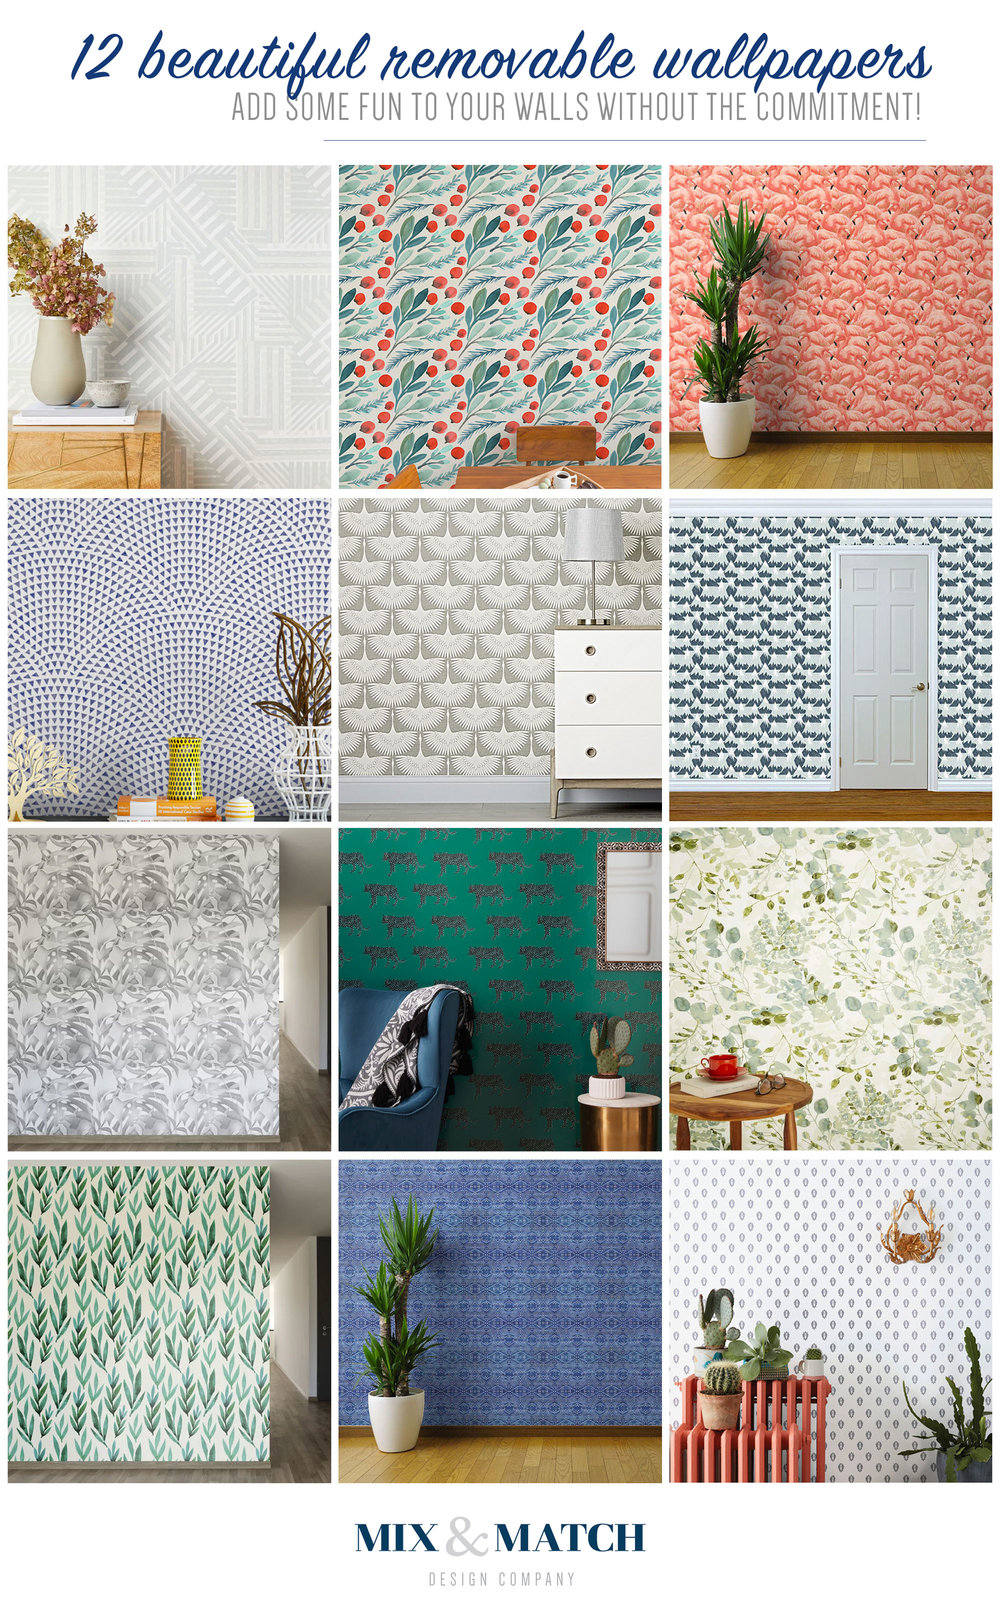 12 Of My Favorite Beautiful Removable Wallpapers